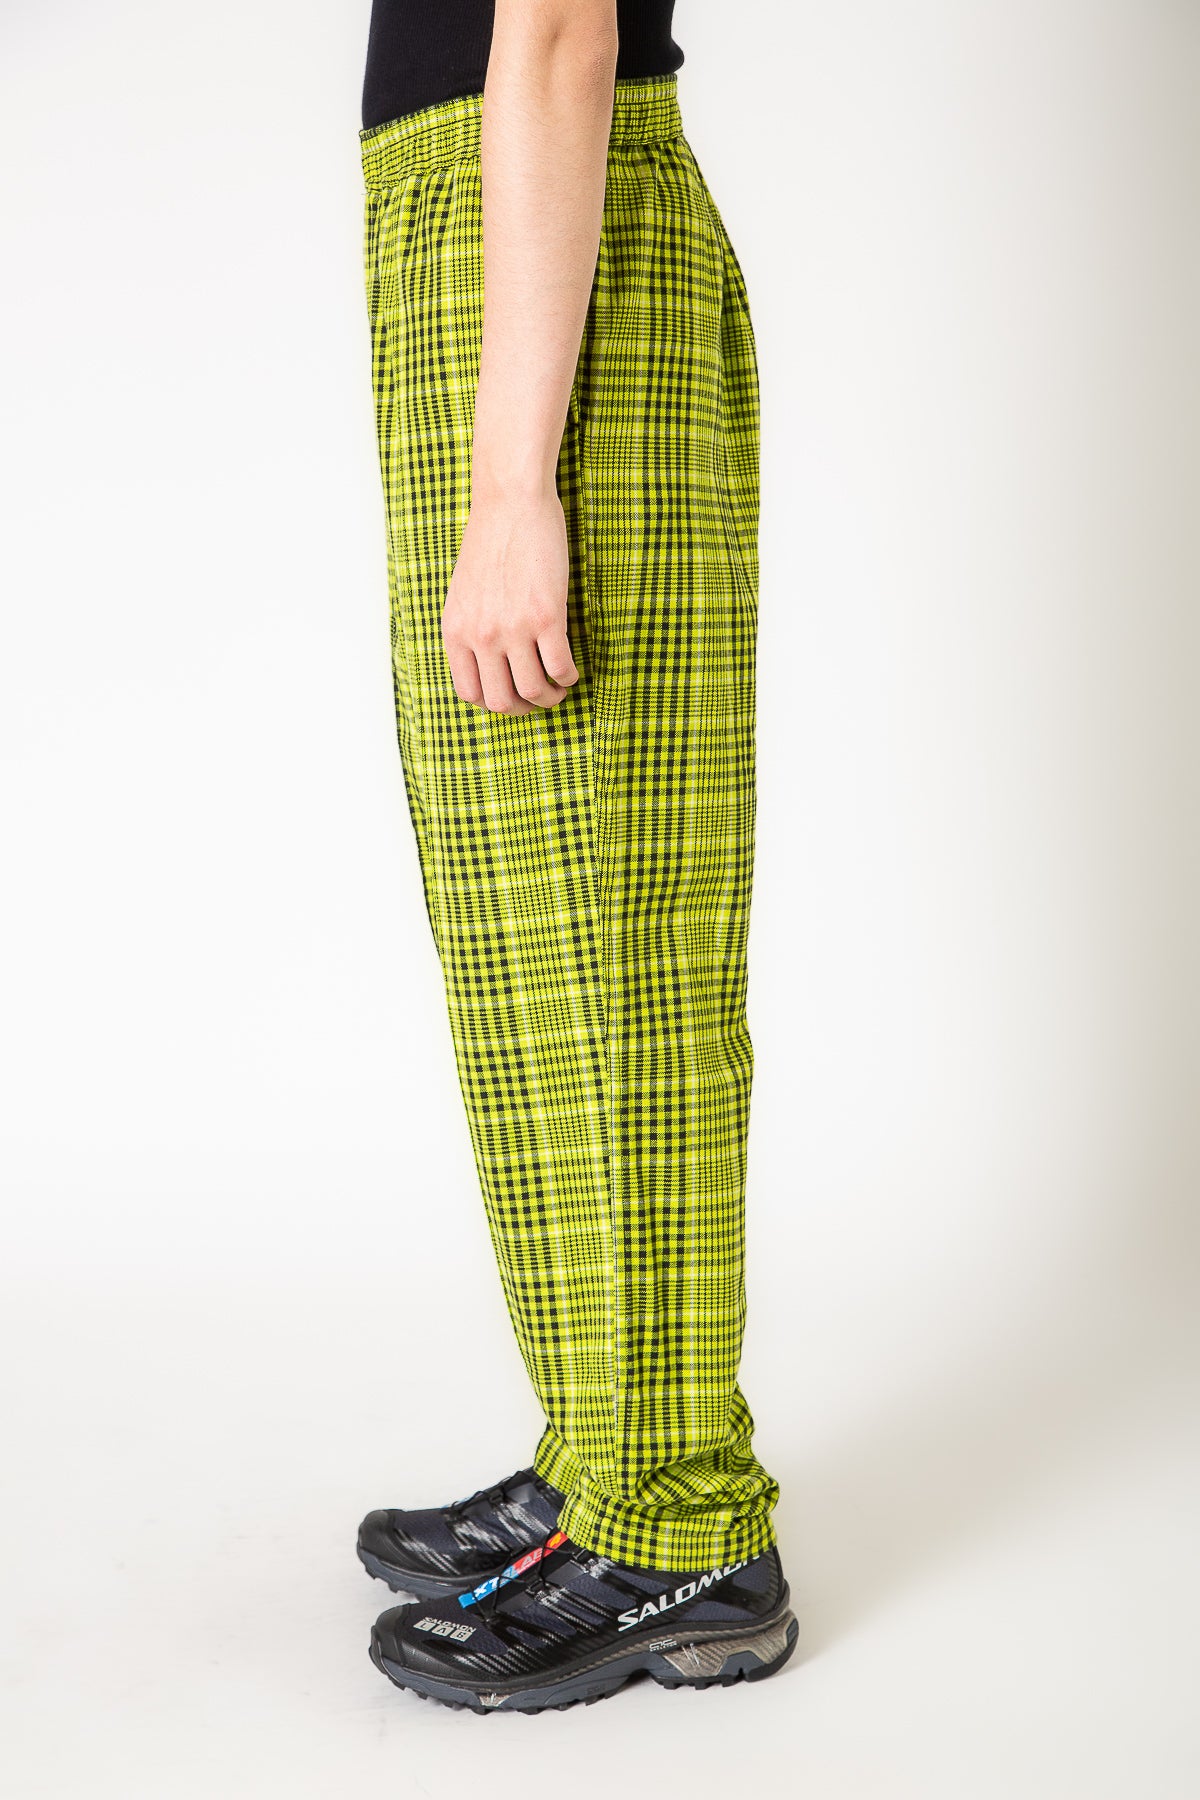 NOMA T.D. | GINGHAM CHECK EASY PANTS